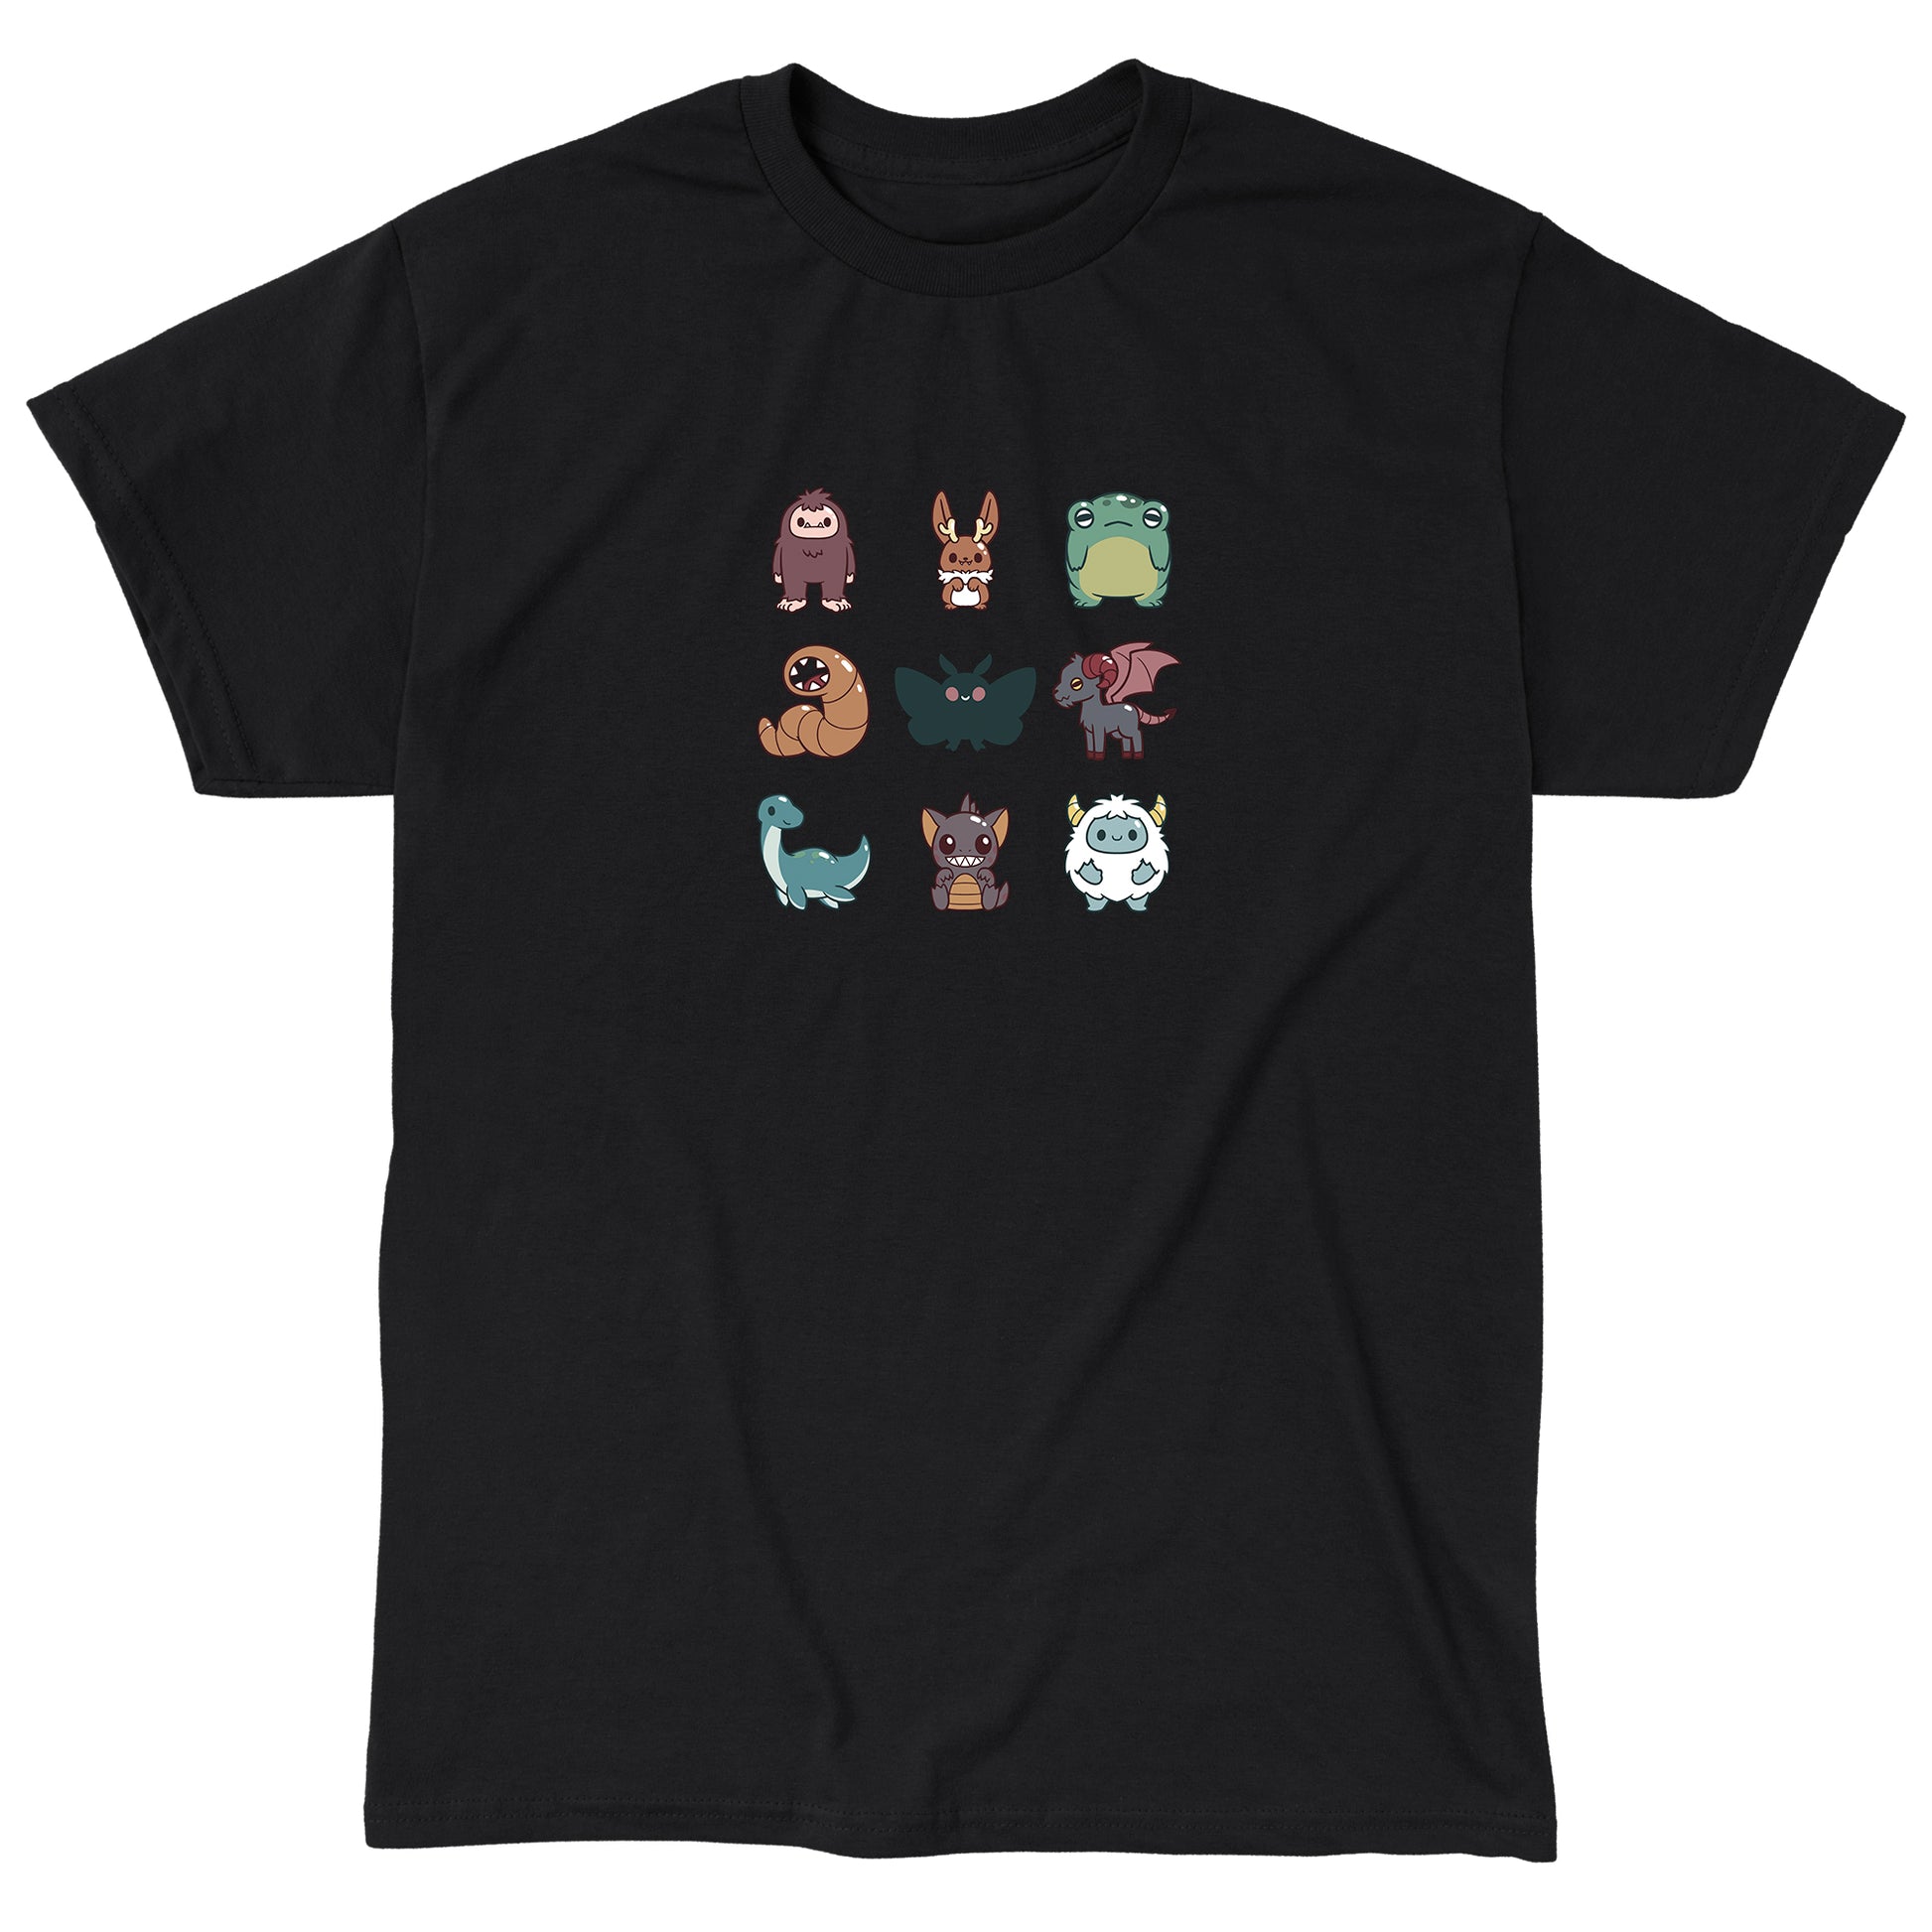 Classic Cotton T-shirt_TeeTurtle Cute Cryptids black t-shirt featuring a grid of cute cryptids, featuring a bigfoot, bunny, frog, worm, moth, winged goat, aquatic dinosaur, bat, and yeti.